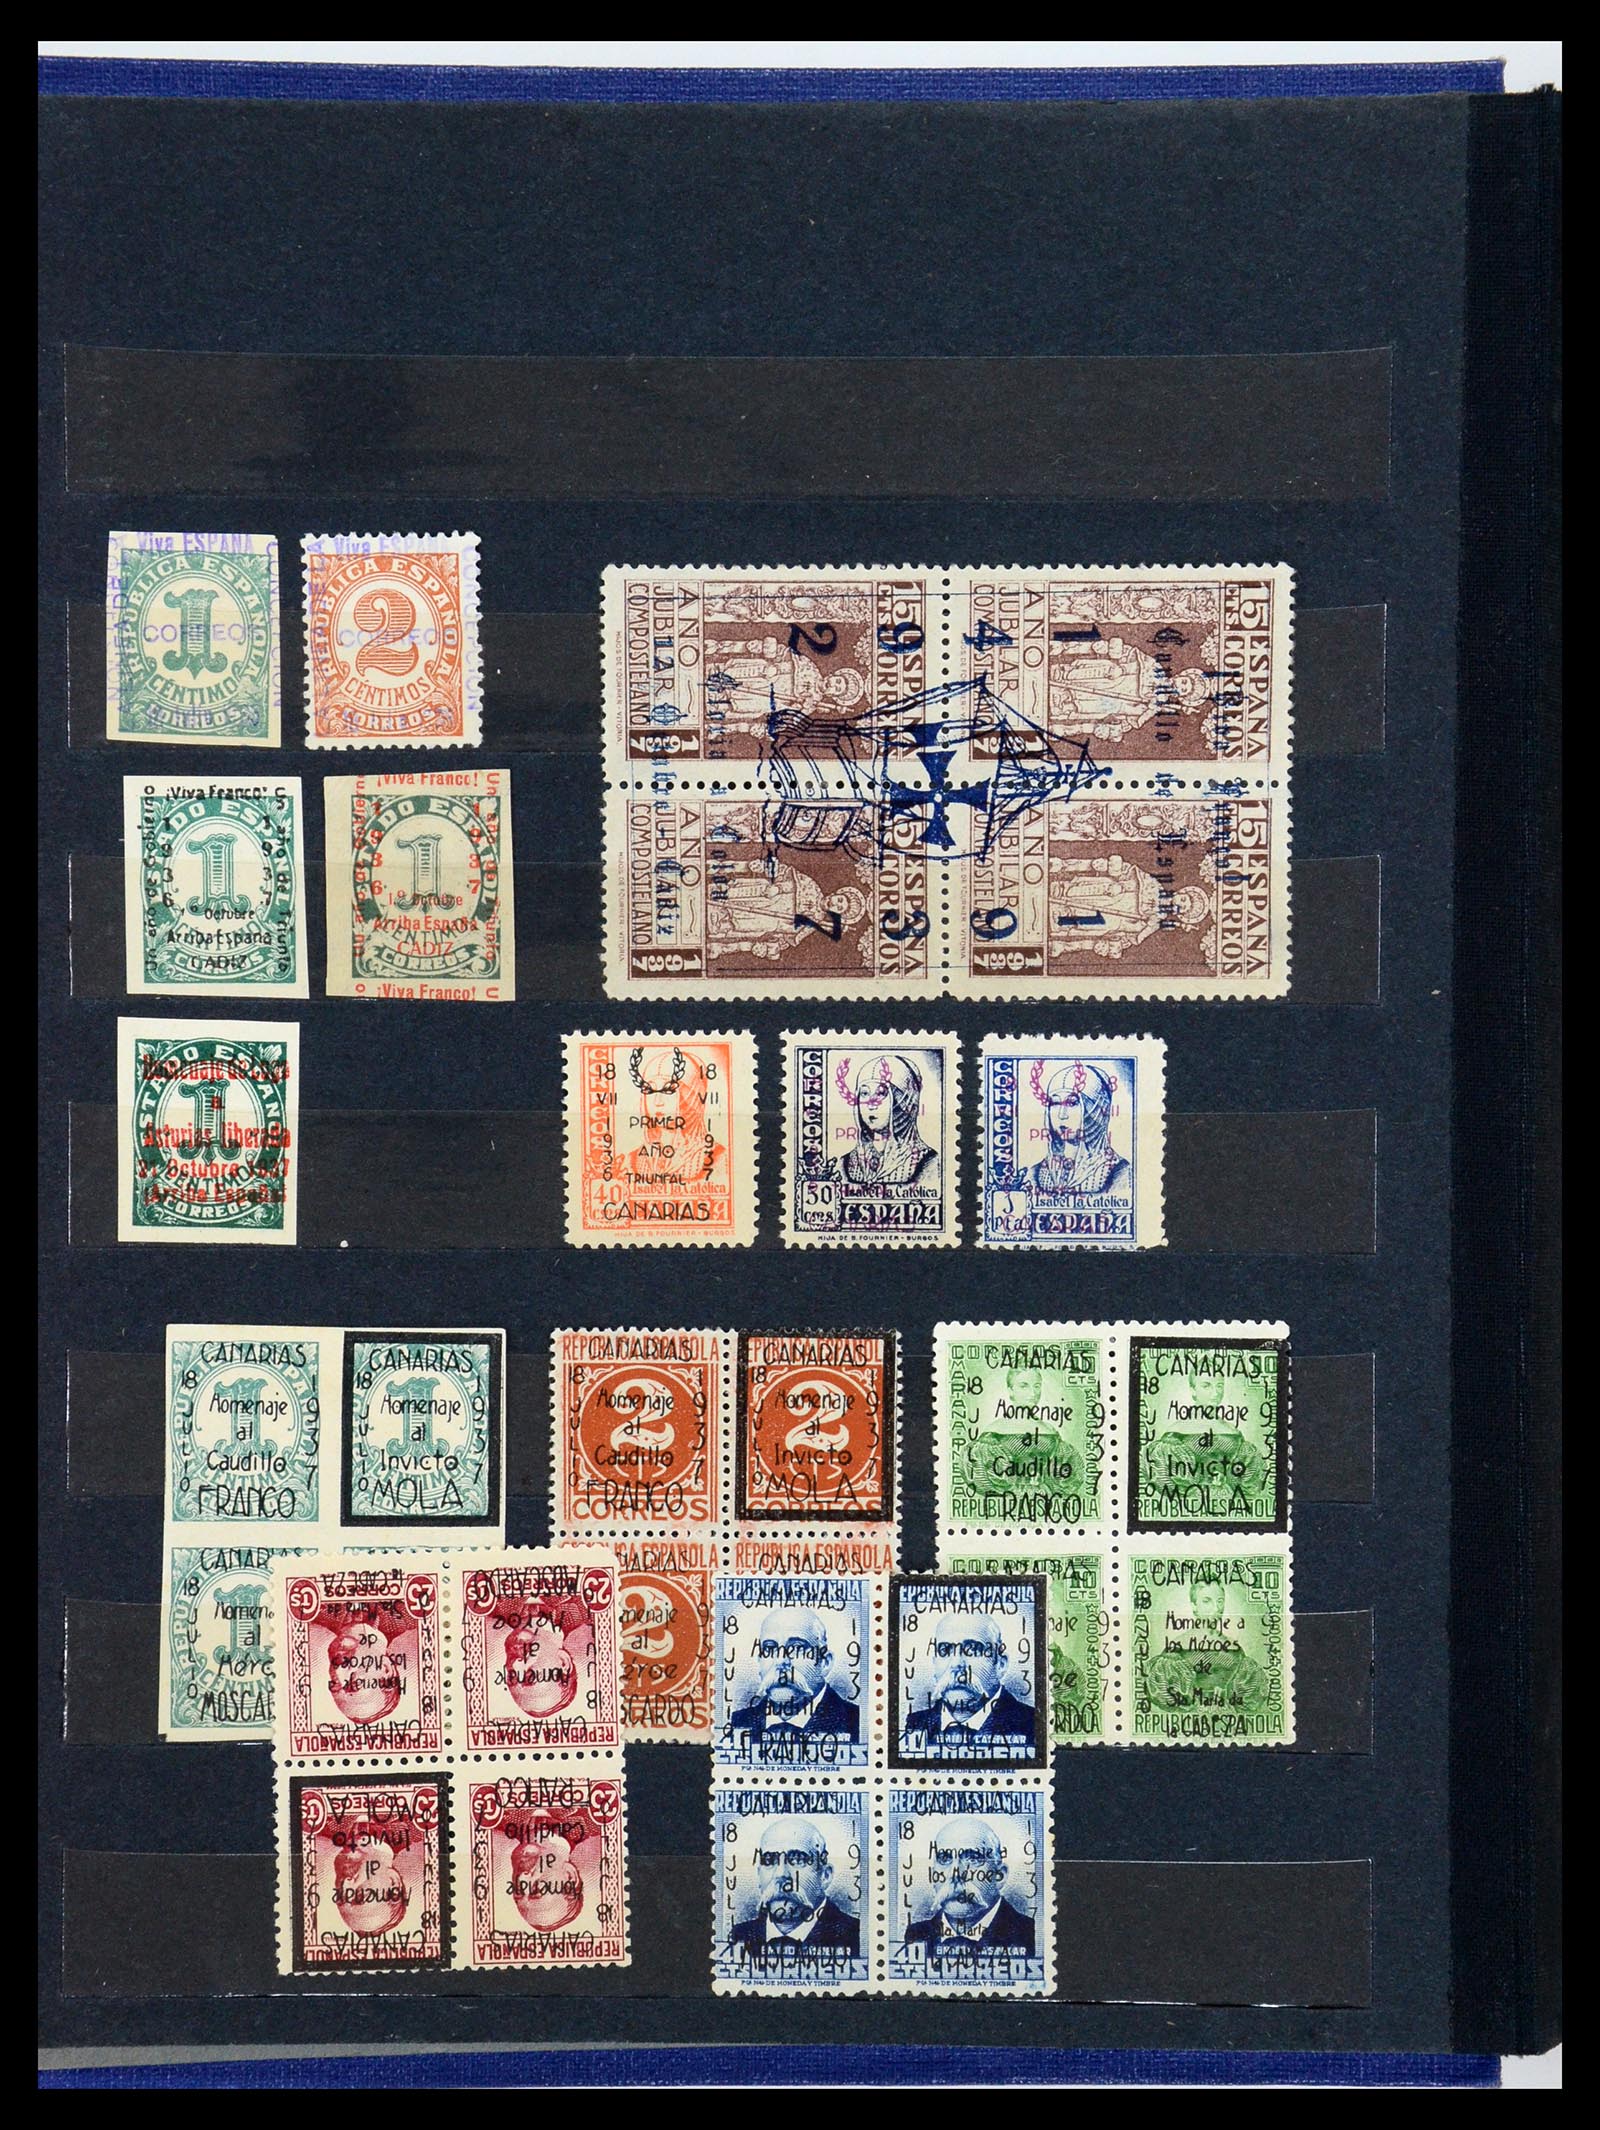 35824 002 - Stamp Collection 35824 Spanish civil war and local issues 1936-1937.